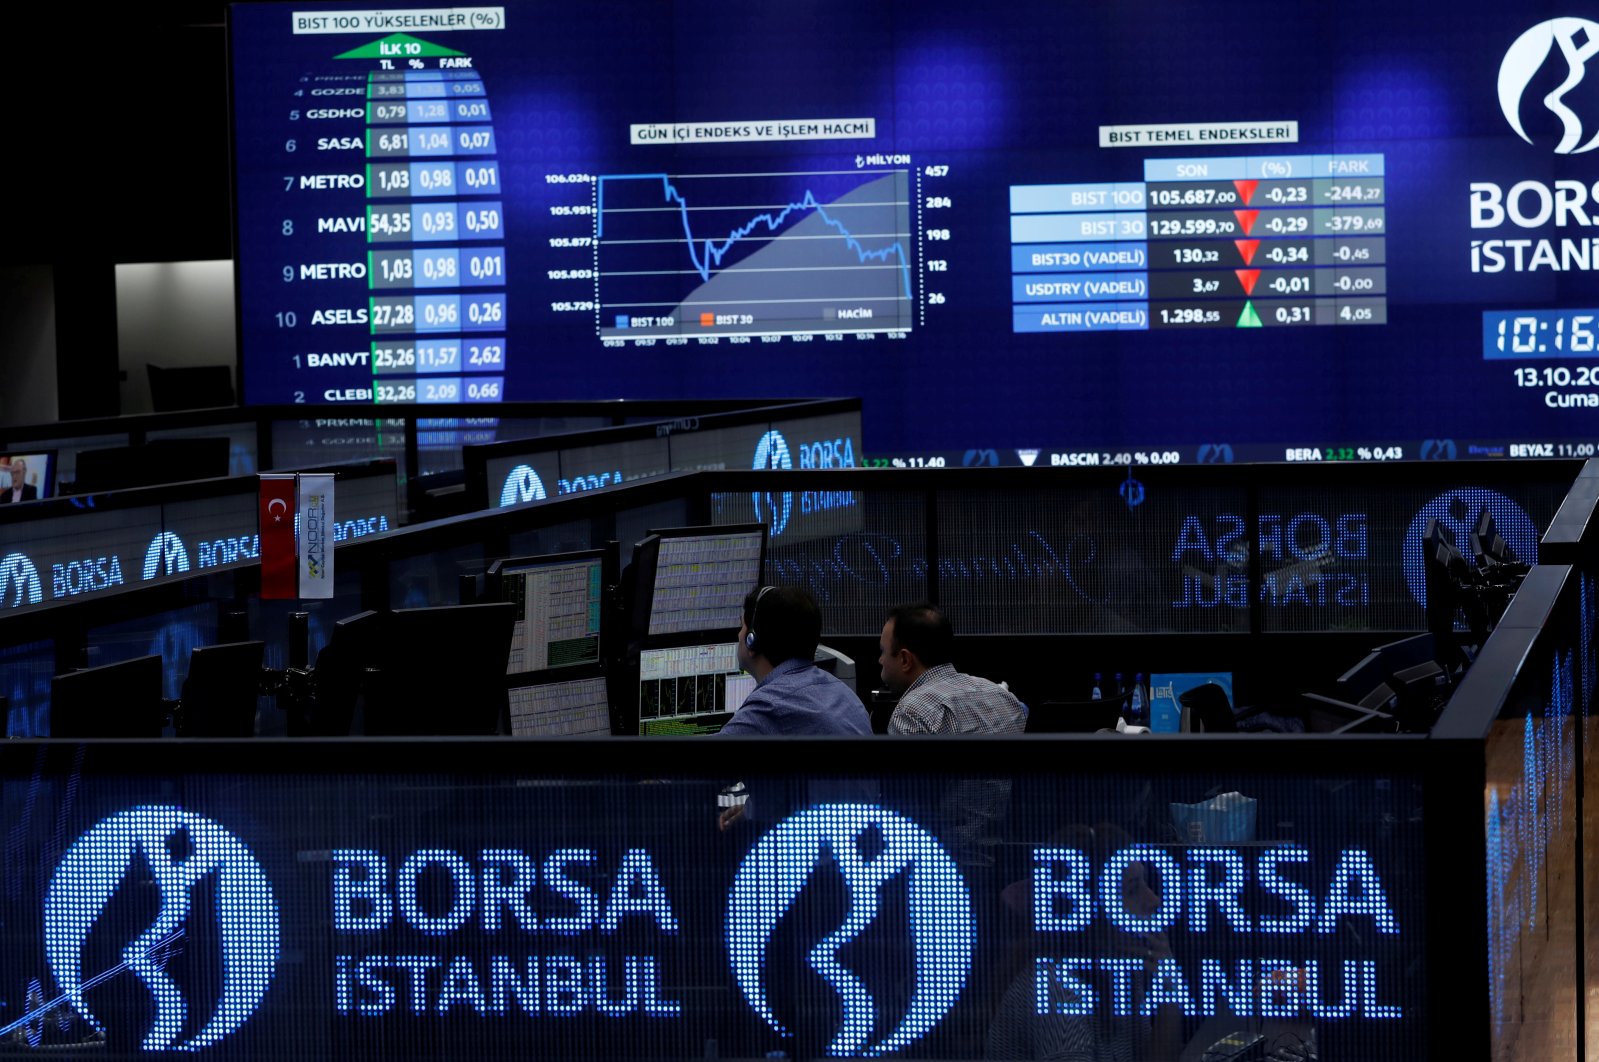 Traders work at their desks on the floor of Borsa Istanbul in Istanbul, Turkey, Oct. 13, 2017. (Reuters Photo)